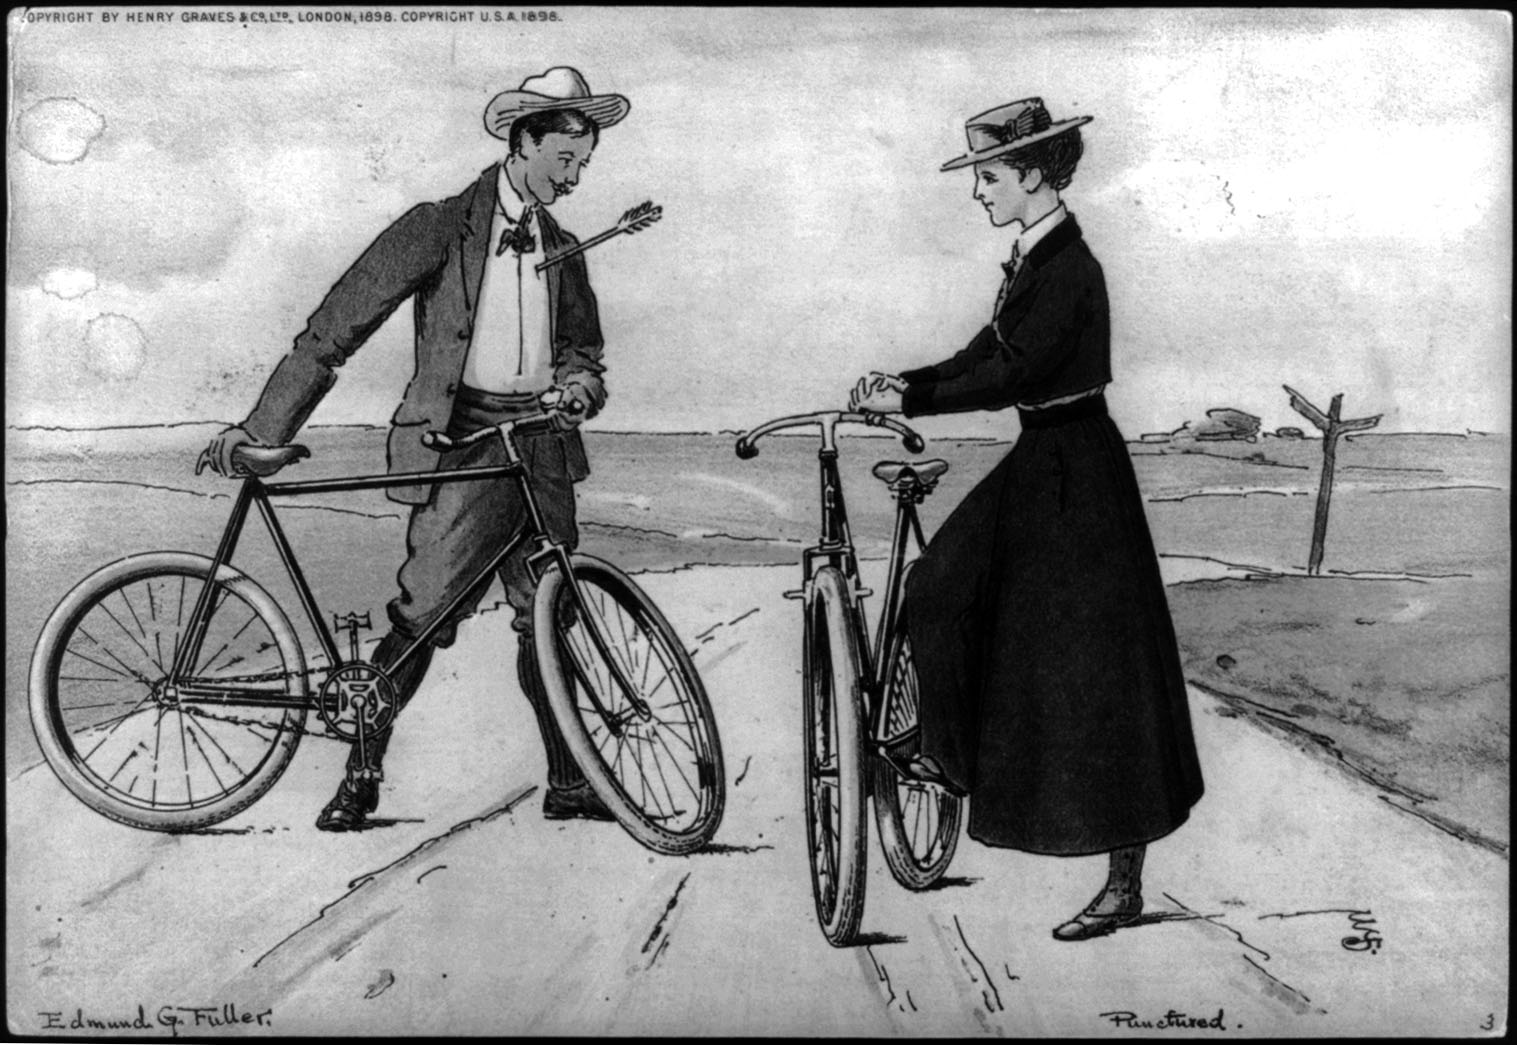 Illustration titled "Punctured" shows a man with arrow in chest, on a road holding a bicycle, facing a woman with a bicycle.